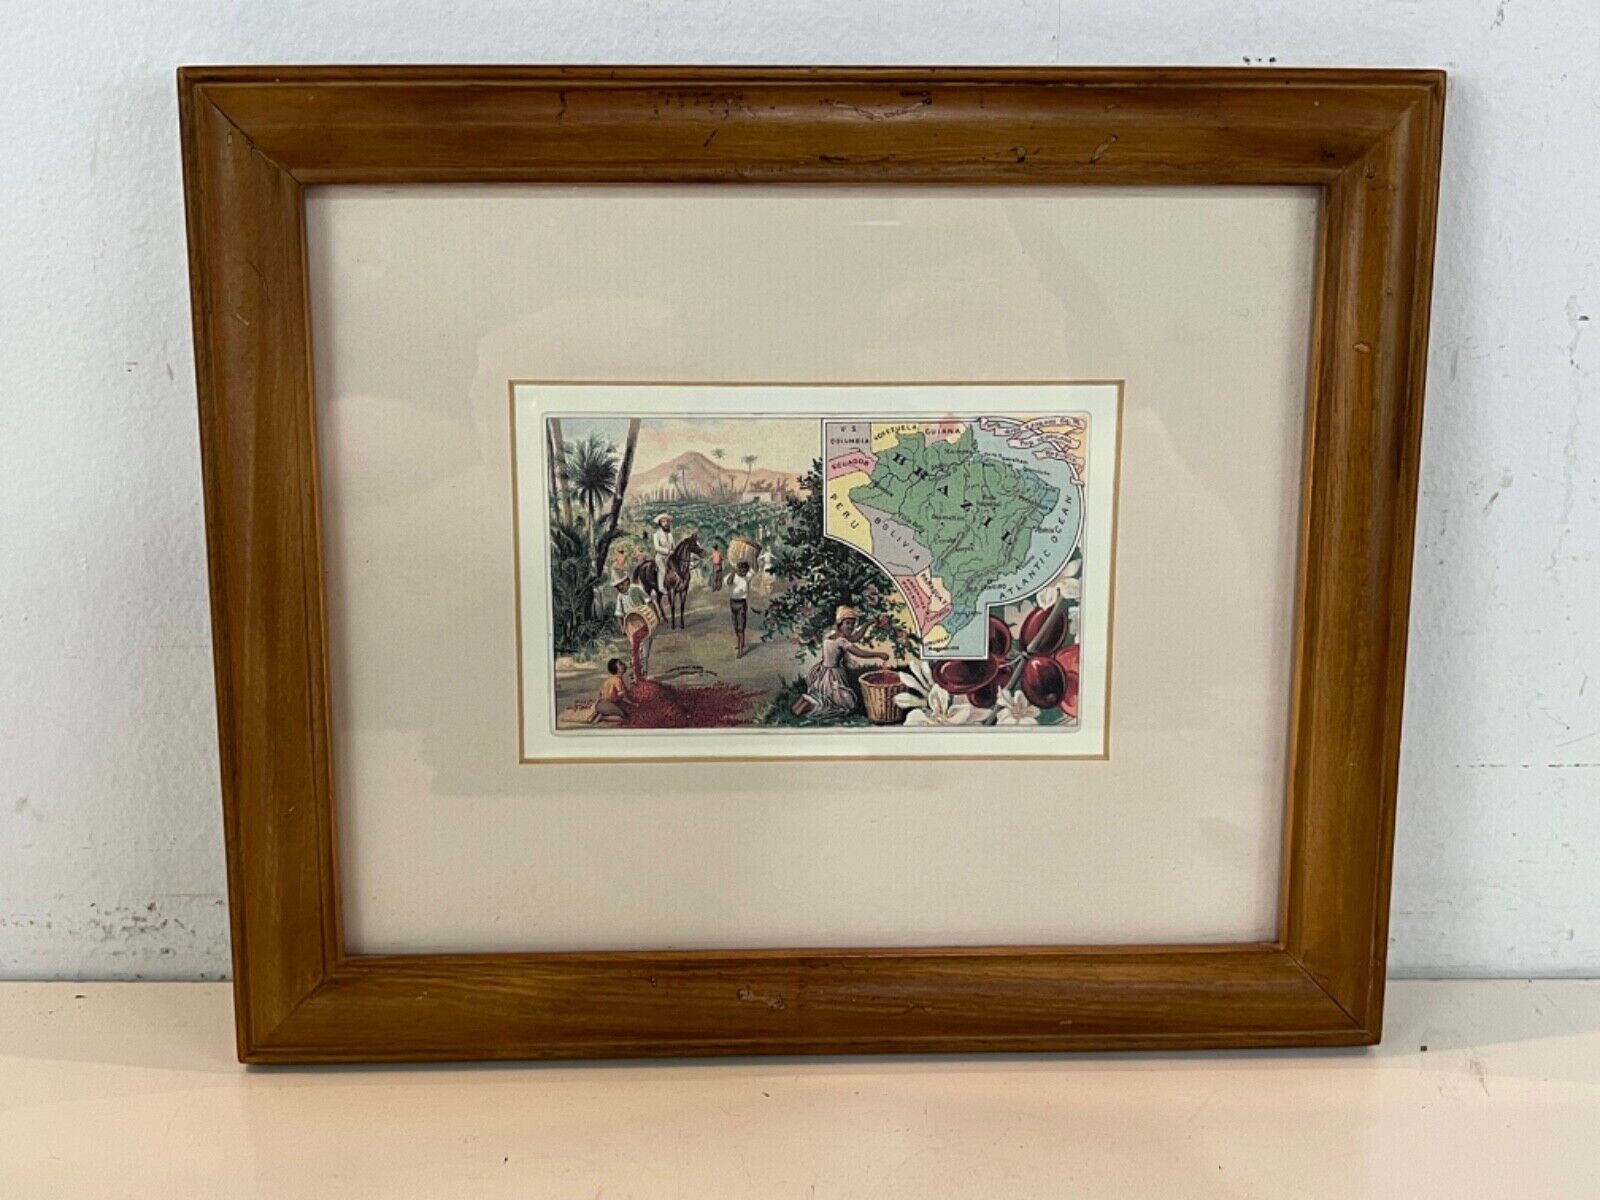 Antique “Brazil” Arbuckle Bros Miniature Map Colored Lithograph Framed